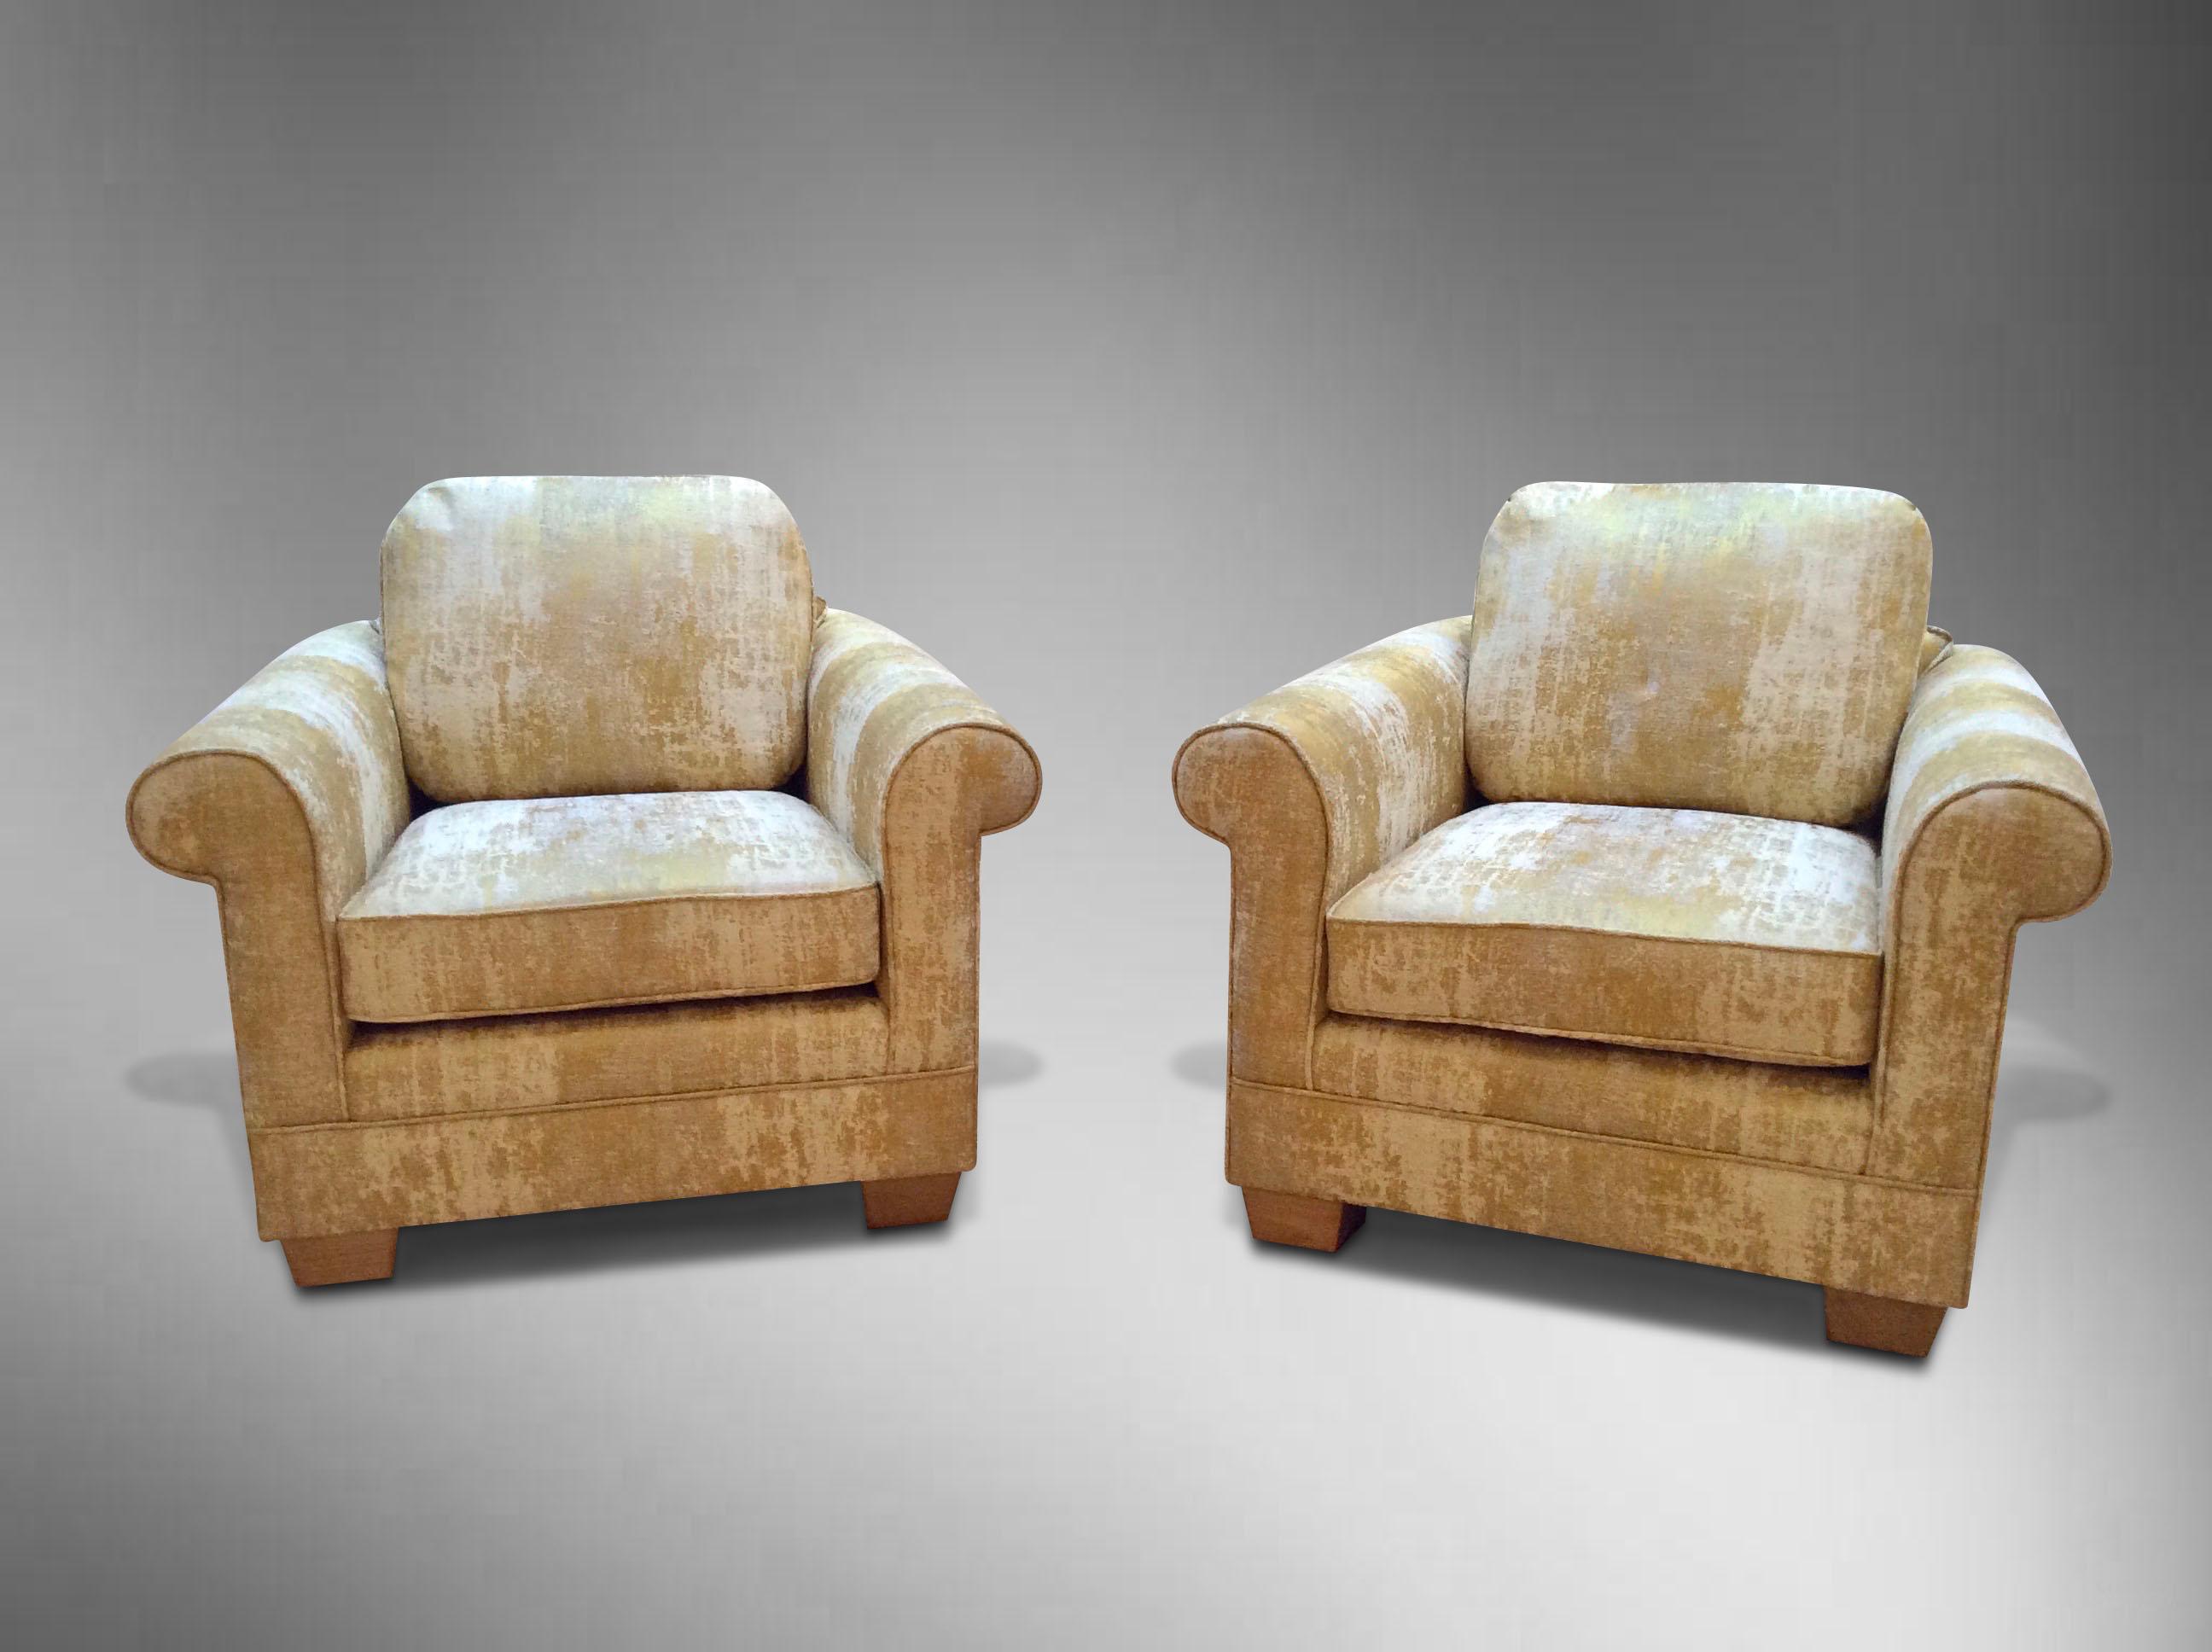 Generously proportioned with deep, very comfortable seats, this pair of armchairs rests on wood bun feet and has been re-upholstered in textured yellow Fabrice.